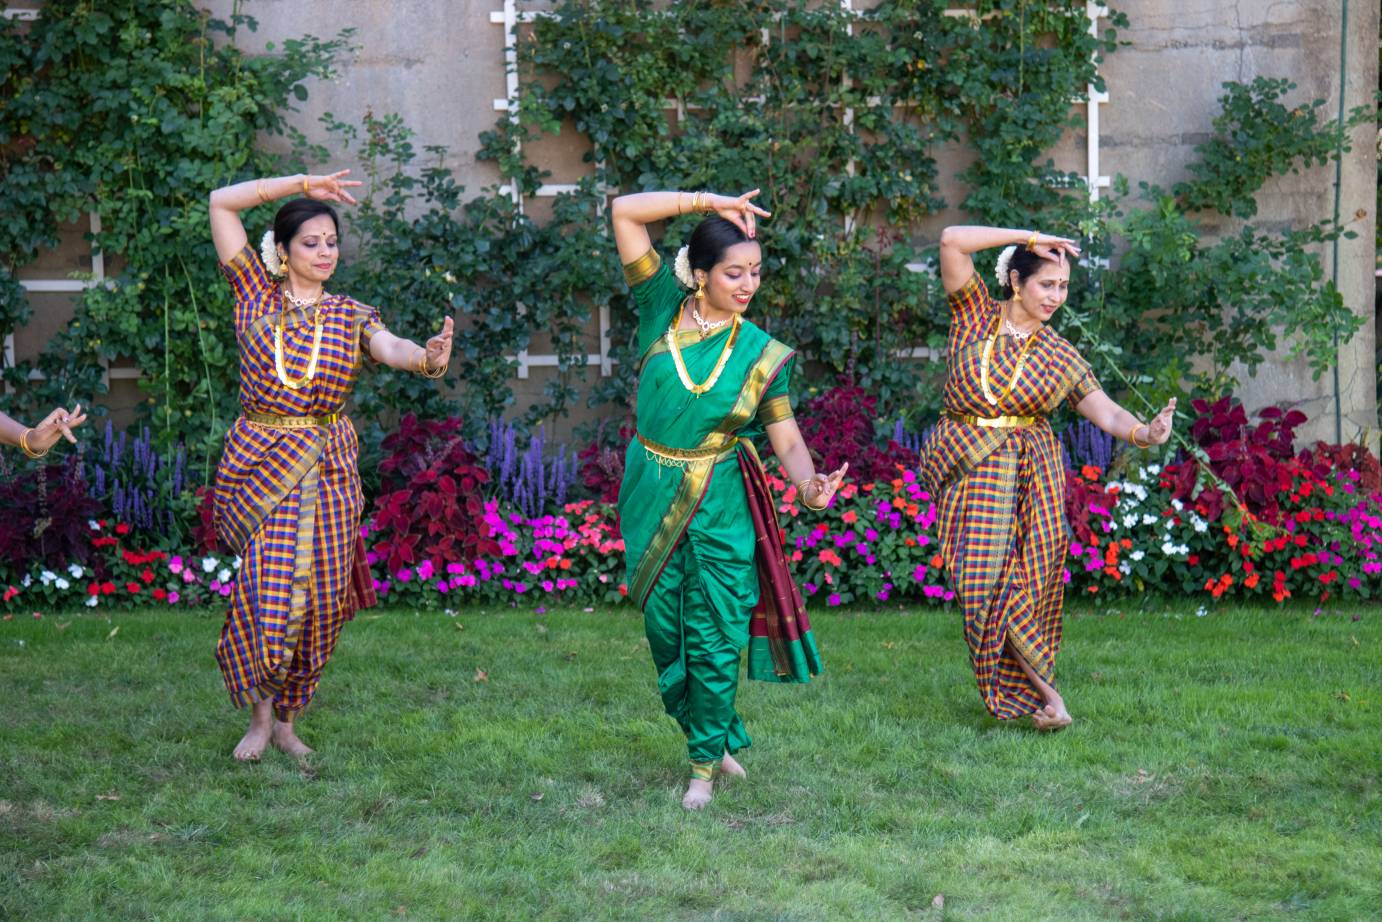 Three Kathak dancers in brightly colored traditional dress with gold belts and necklaces enliven the lawn background with more color. the dancer in the foreground wears bright green and gold, the dancers in the background wear checked prints